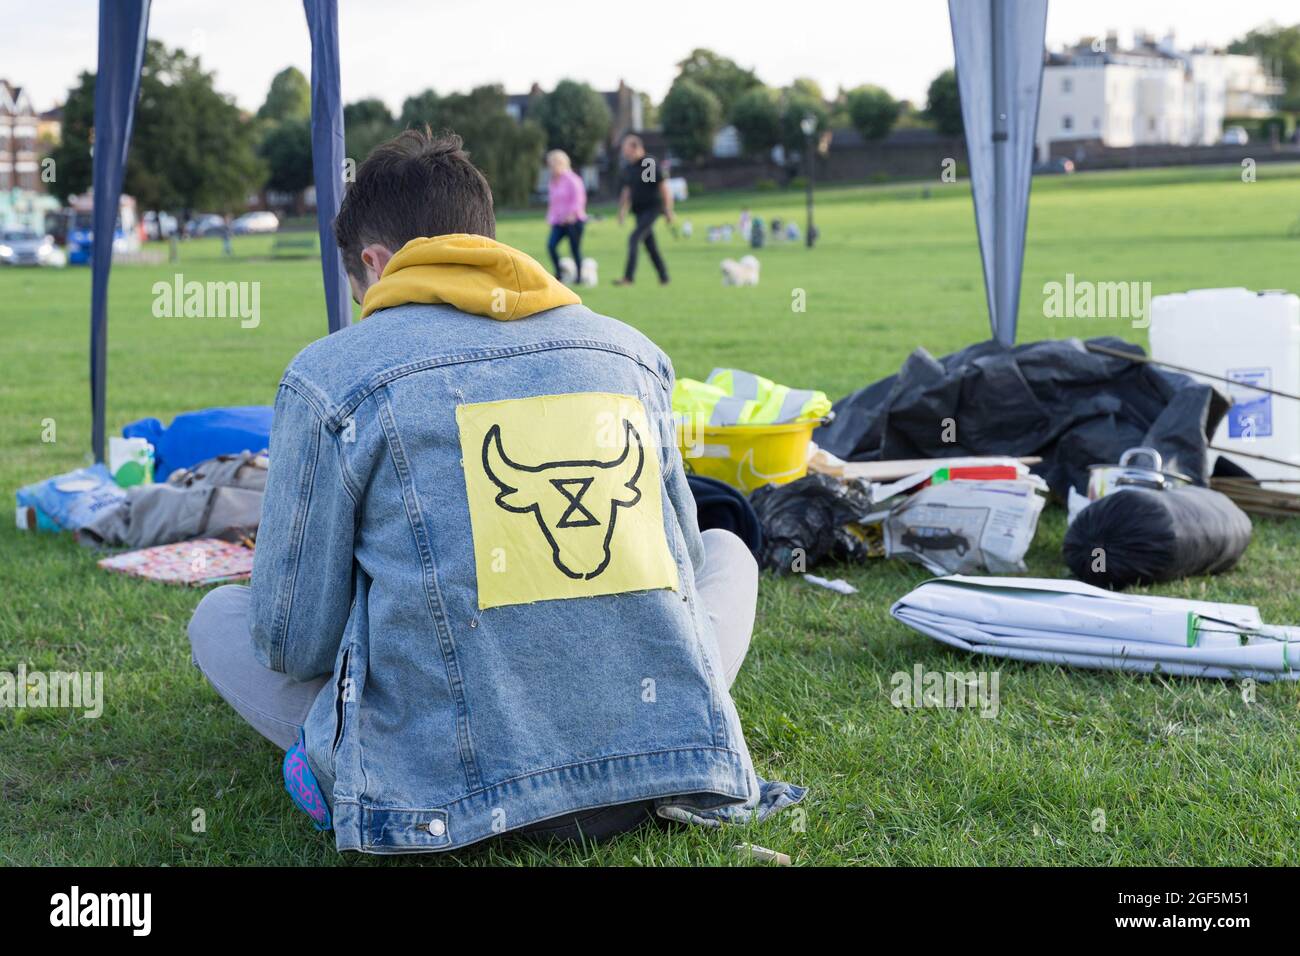 man wears a jean jacket with Animal rebellion logo on its back, South London Greenwich England Stock Photo